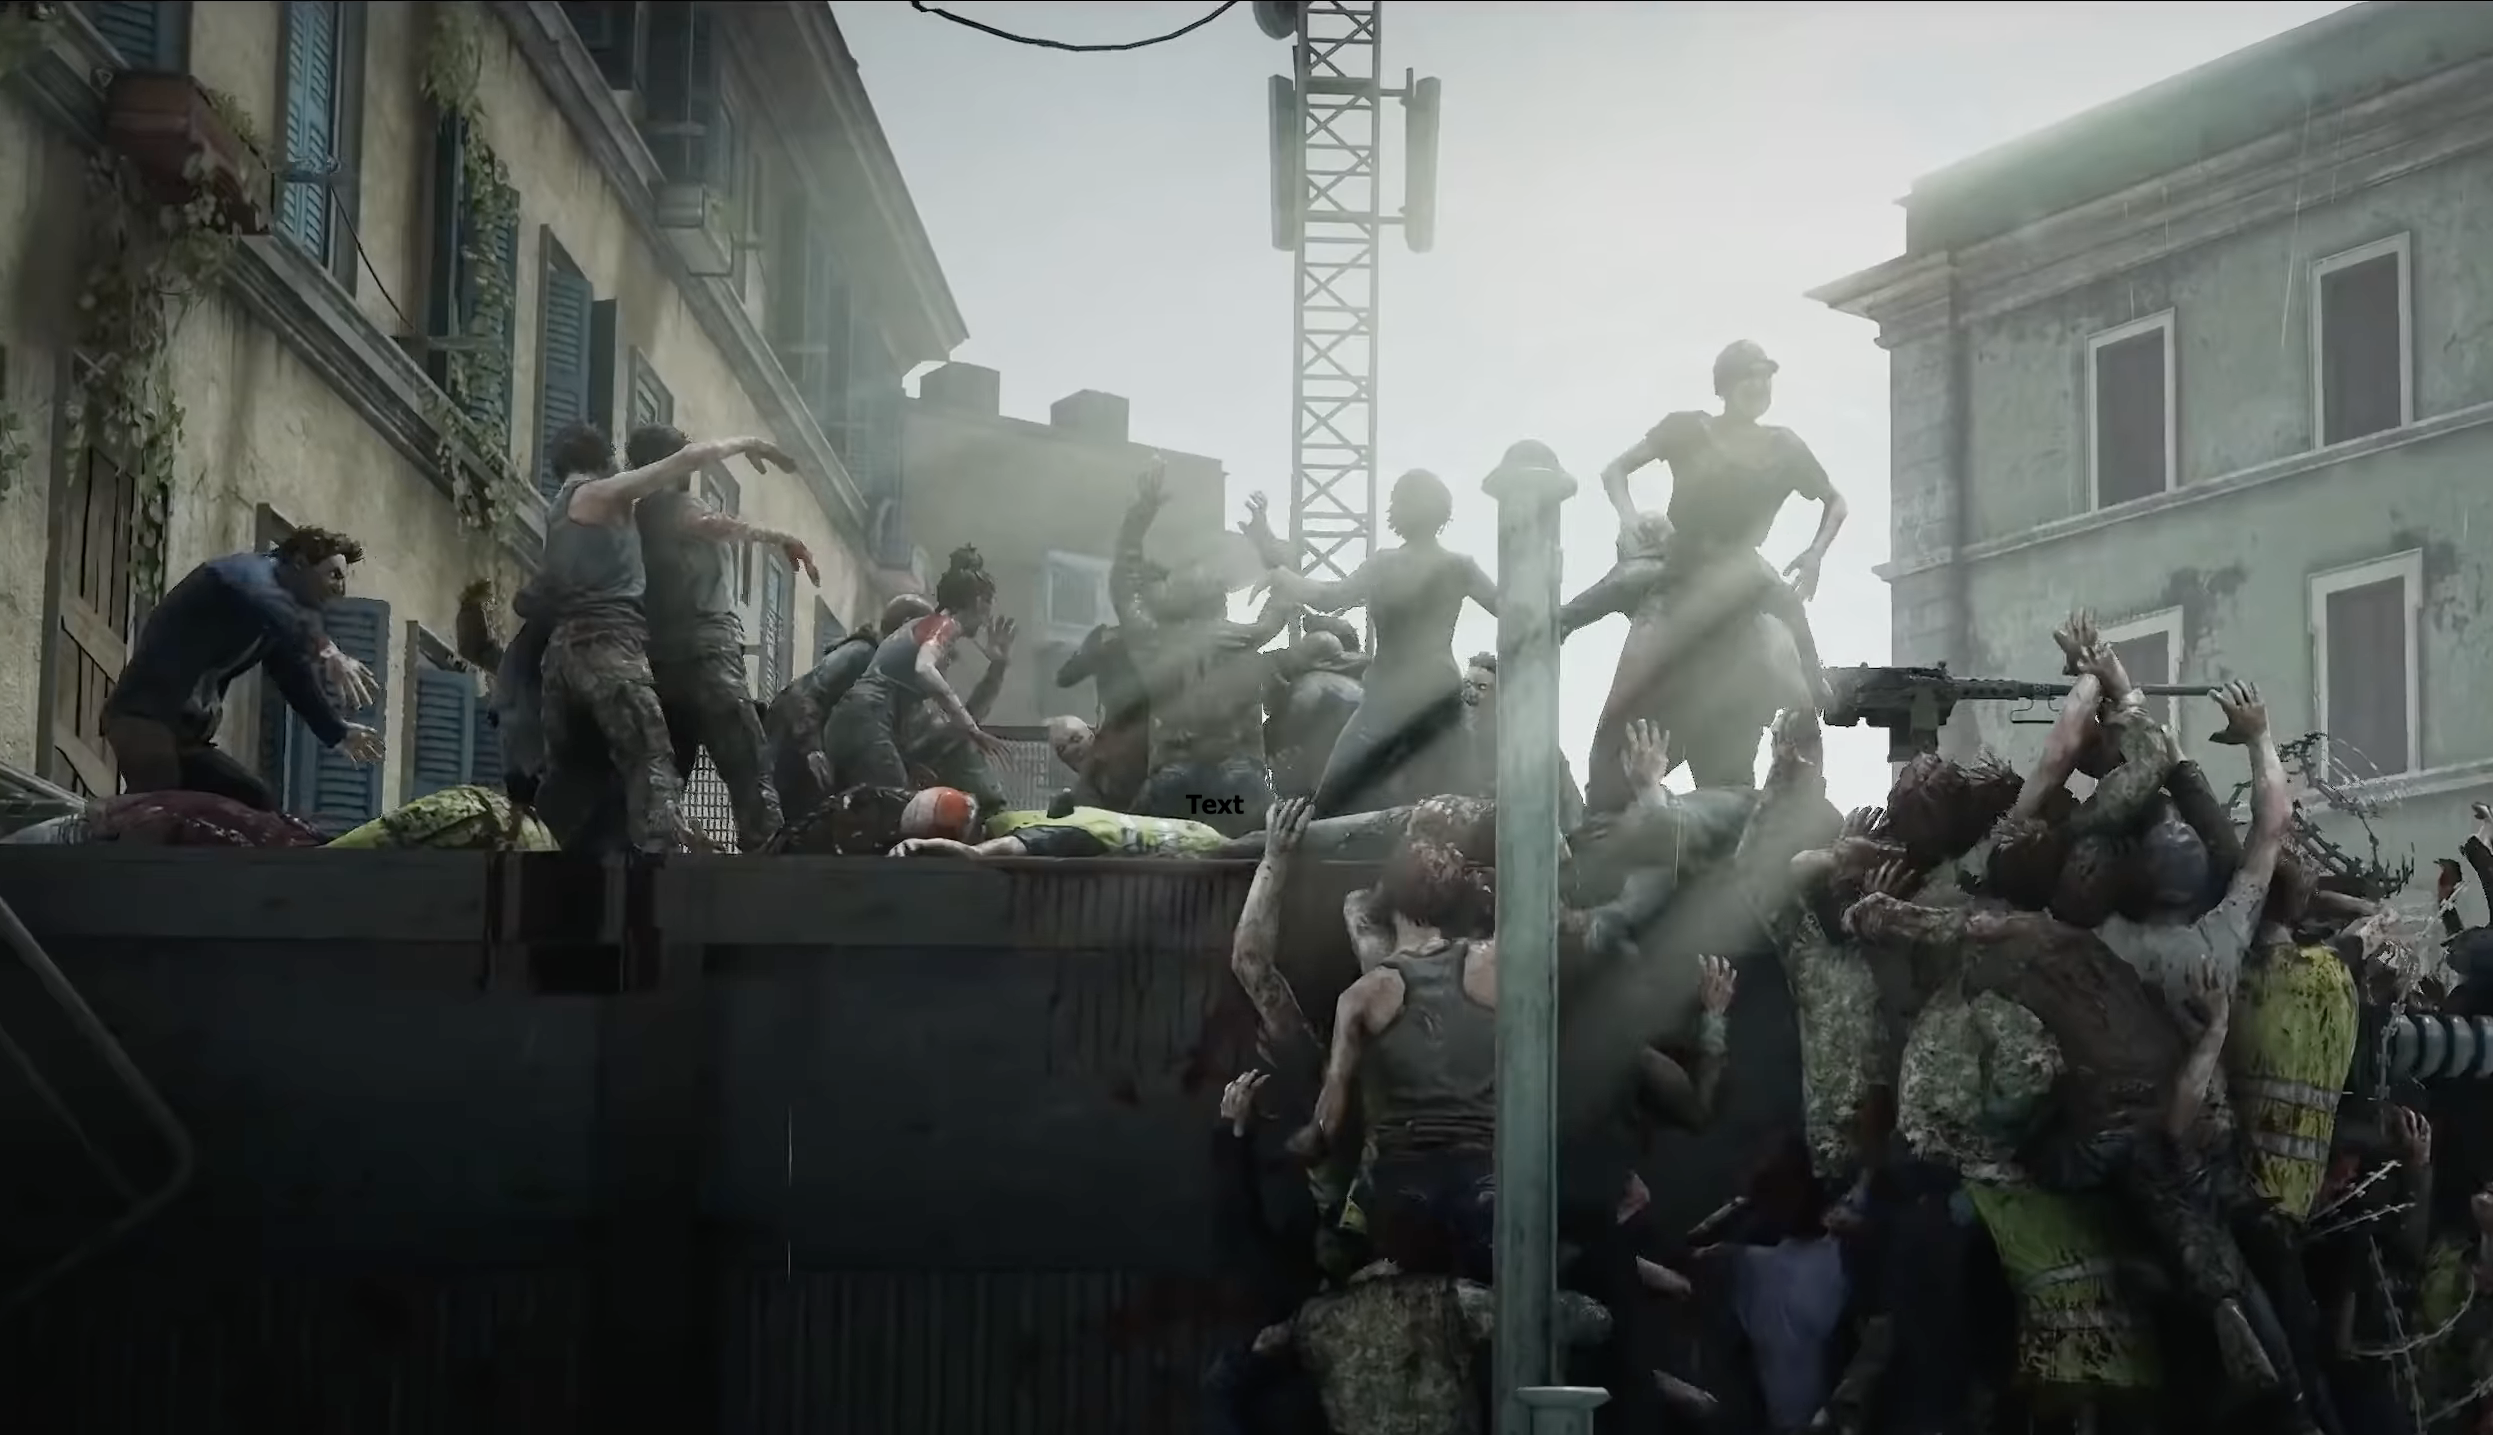 World War Z: Aftermath will release later this year